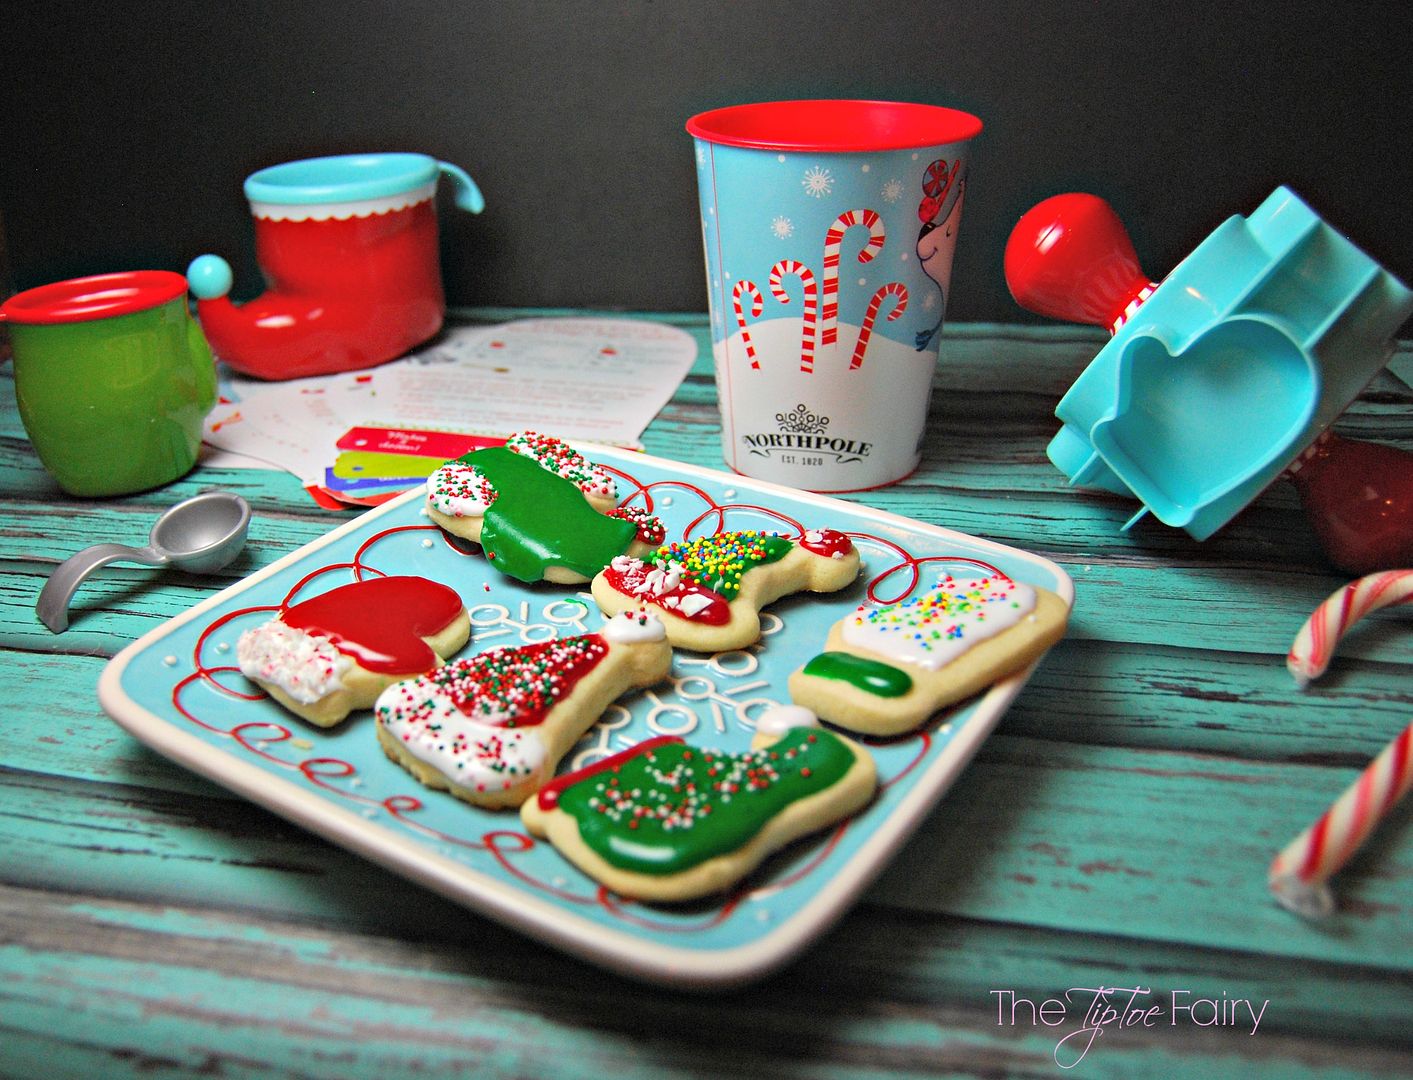 Check out Hallmark's toys and gifts @Walmart like this Bake Like an Elf baking kit and rolling cookie cutter. We had so much fun making cookies with these | The TipToe Fairy #NorthpoleFun #shop